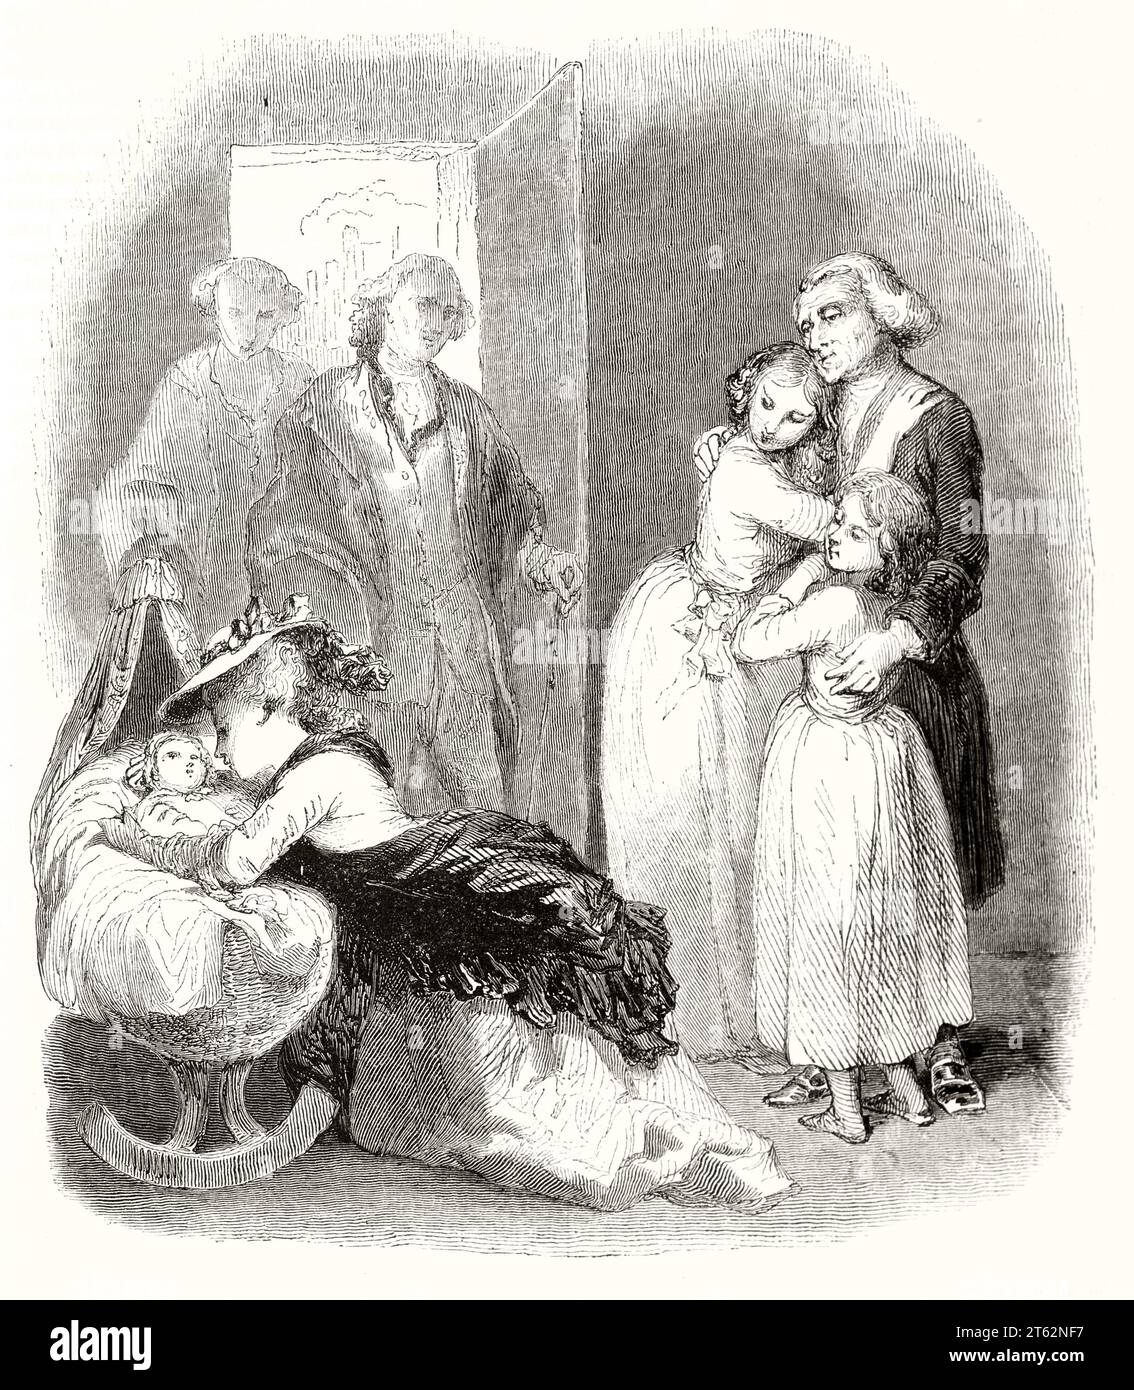 Old illustration of loving woman and baby in the cradle. By Tony Johannot, publ. on Magasin Pittoresque, Paris, 1849 Stock Photo